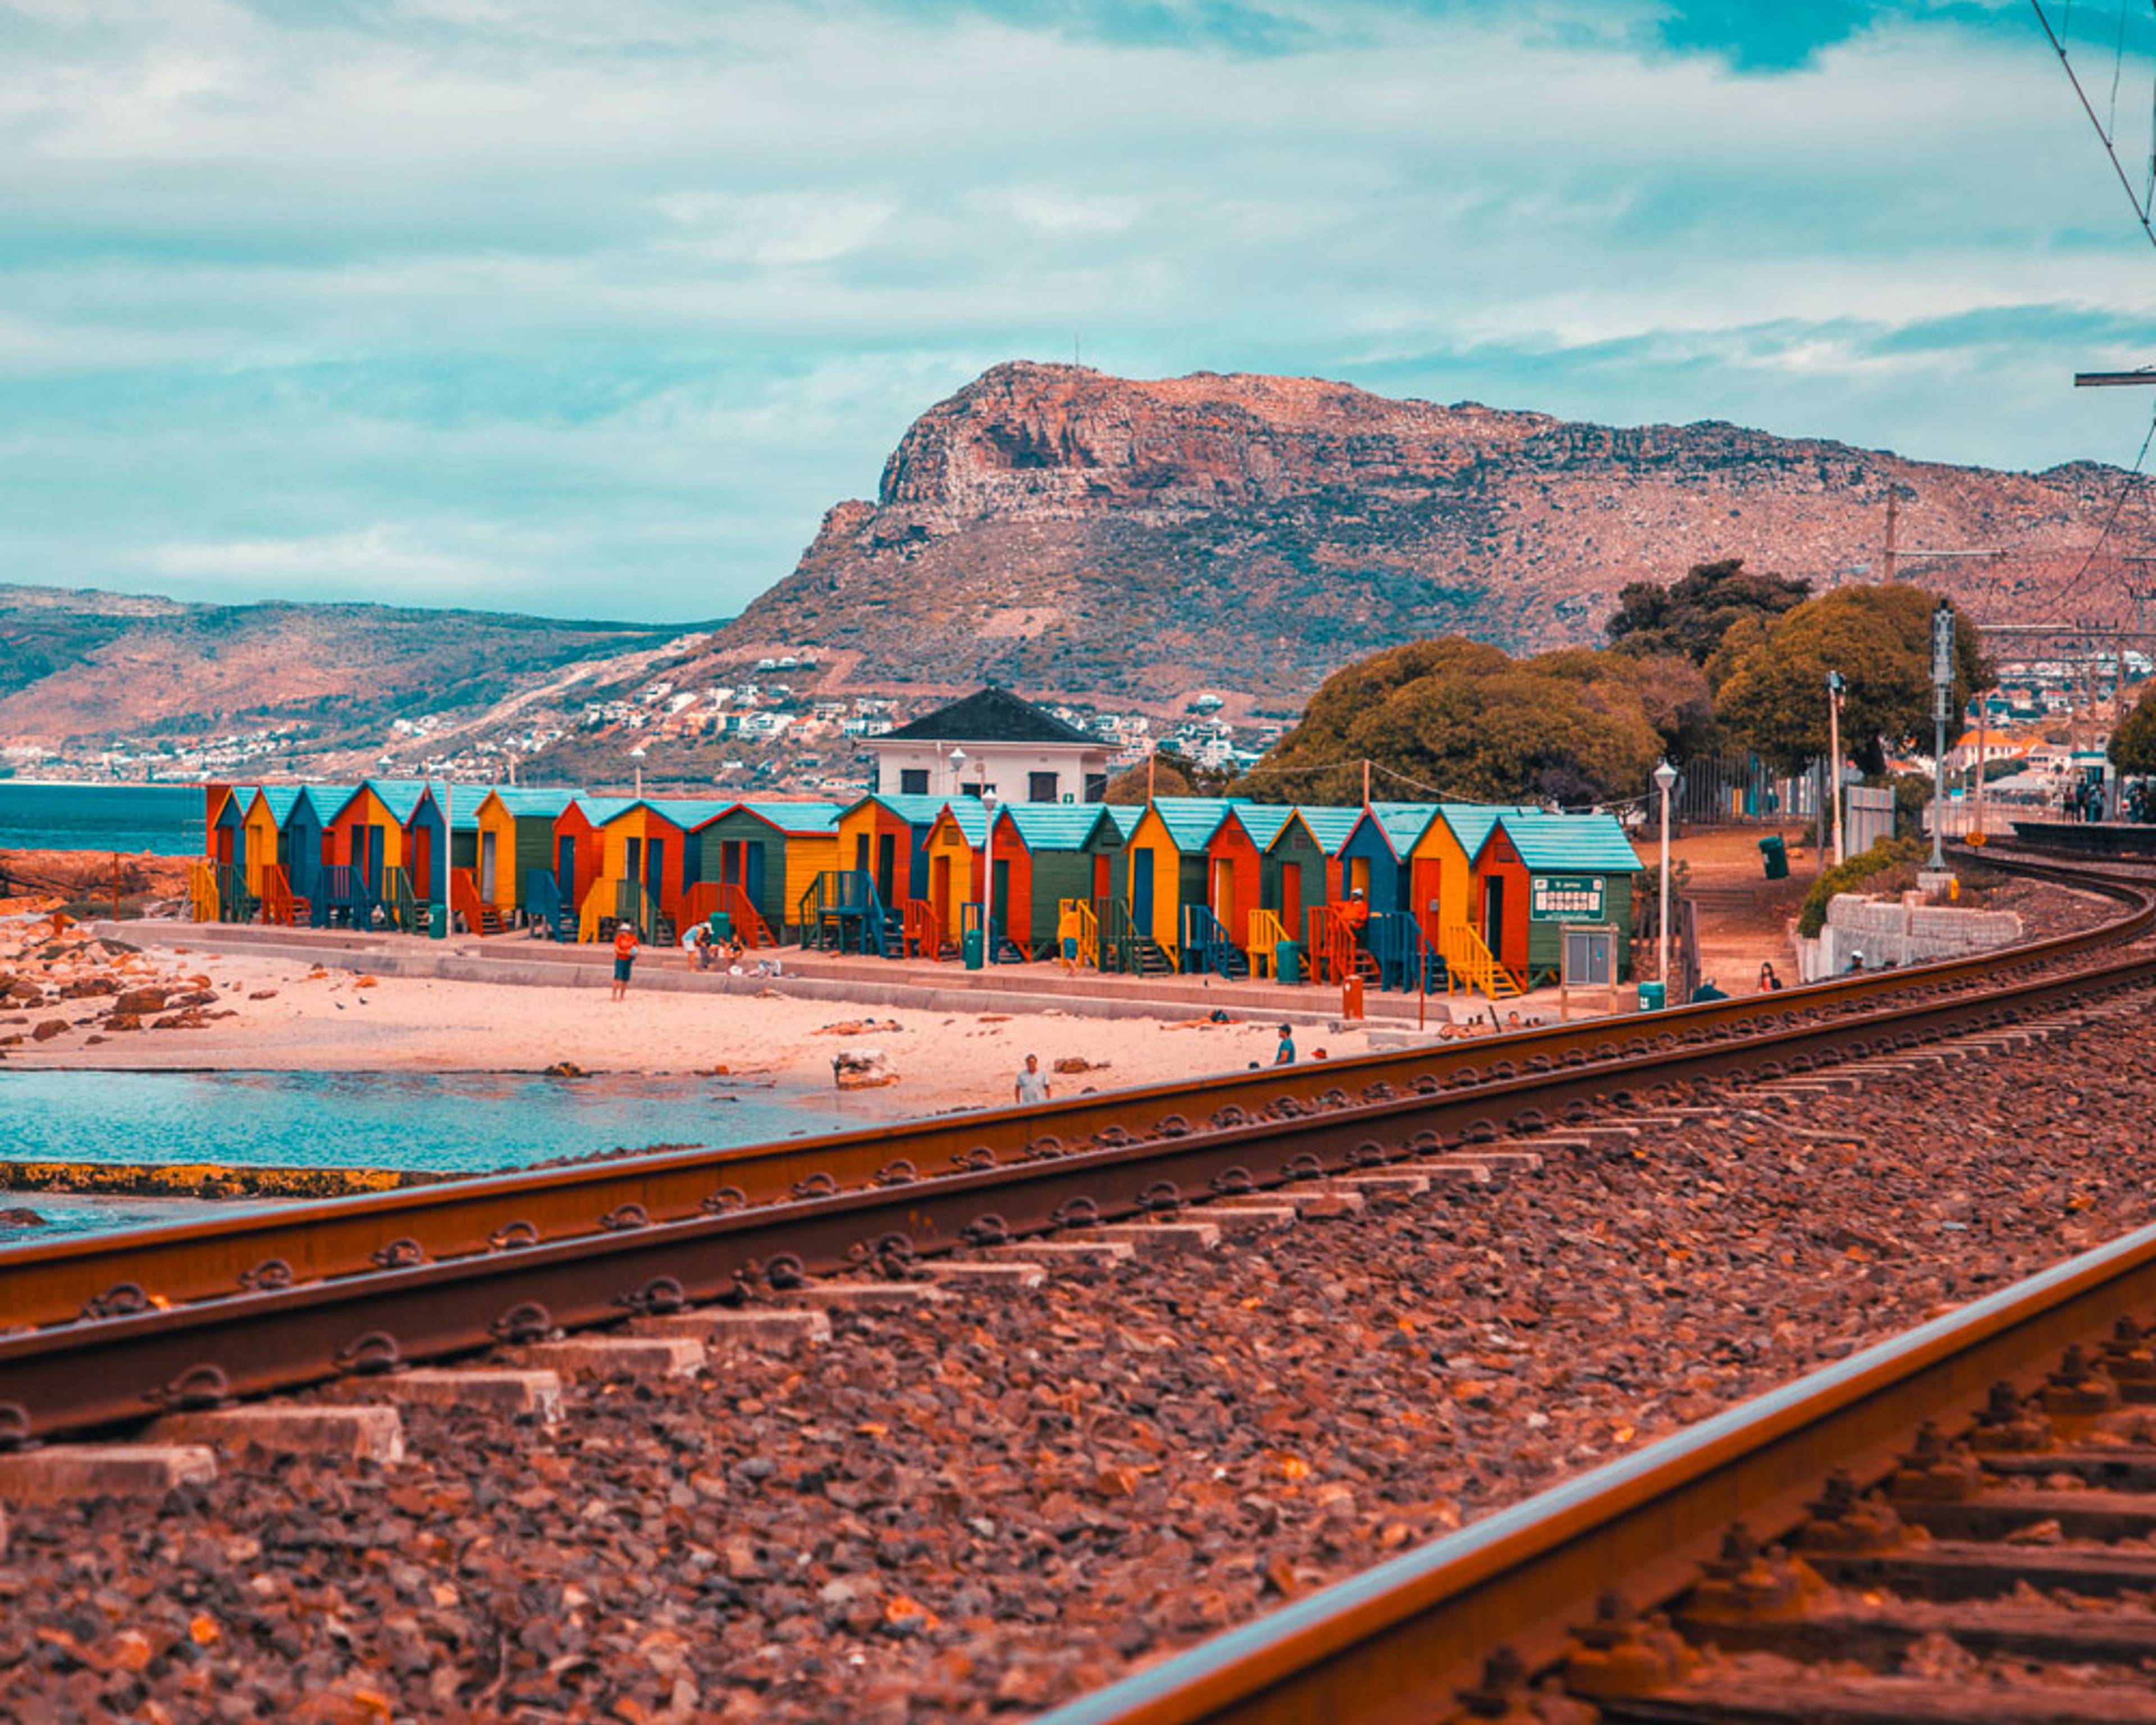 Design your perfect train tour with a local expert in South Africa